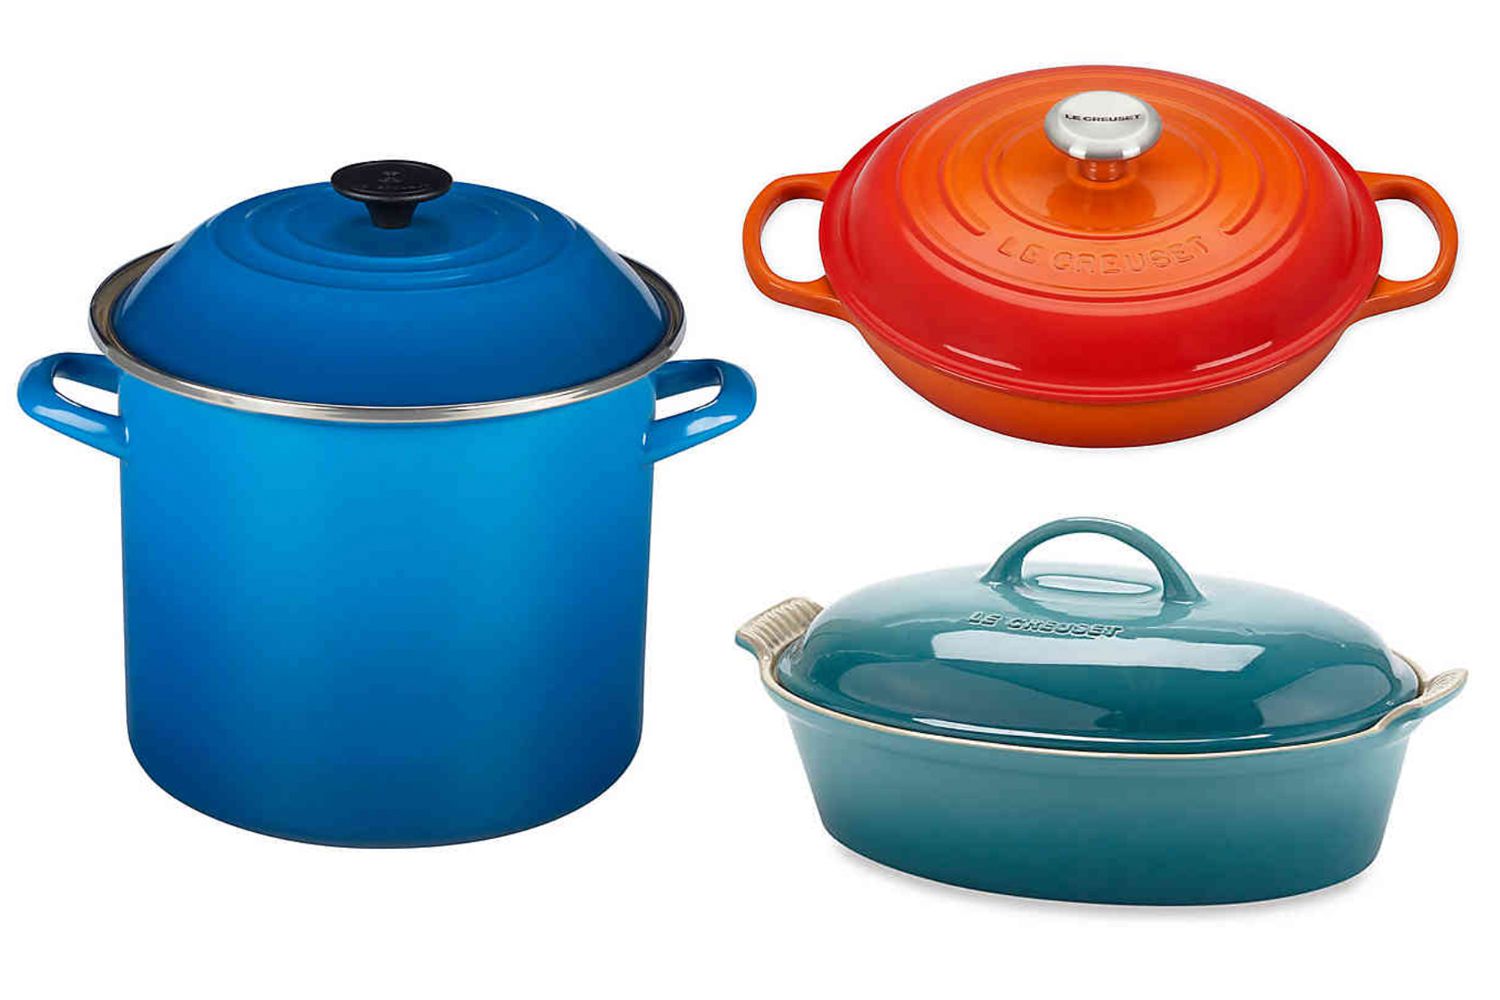 bed bath and beyond pots and pans set